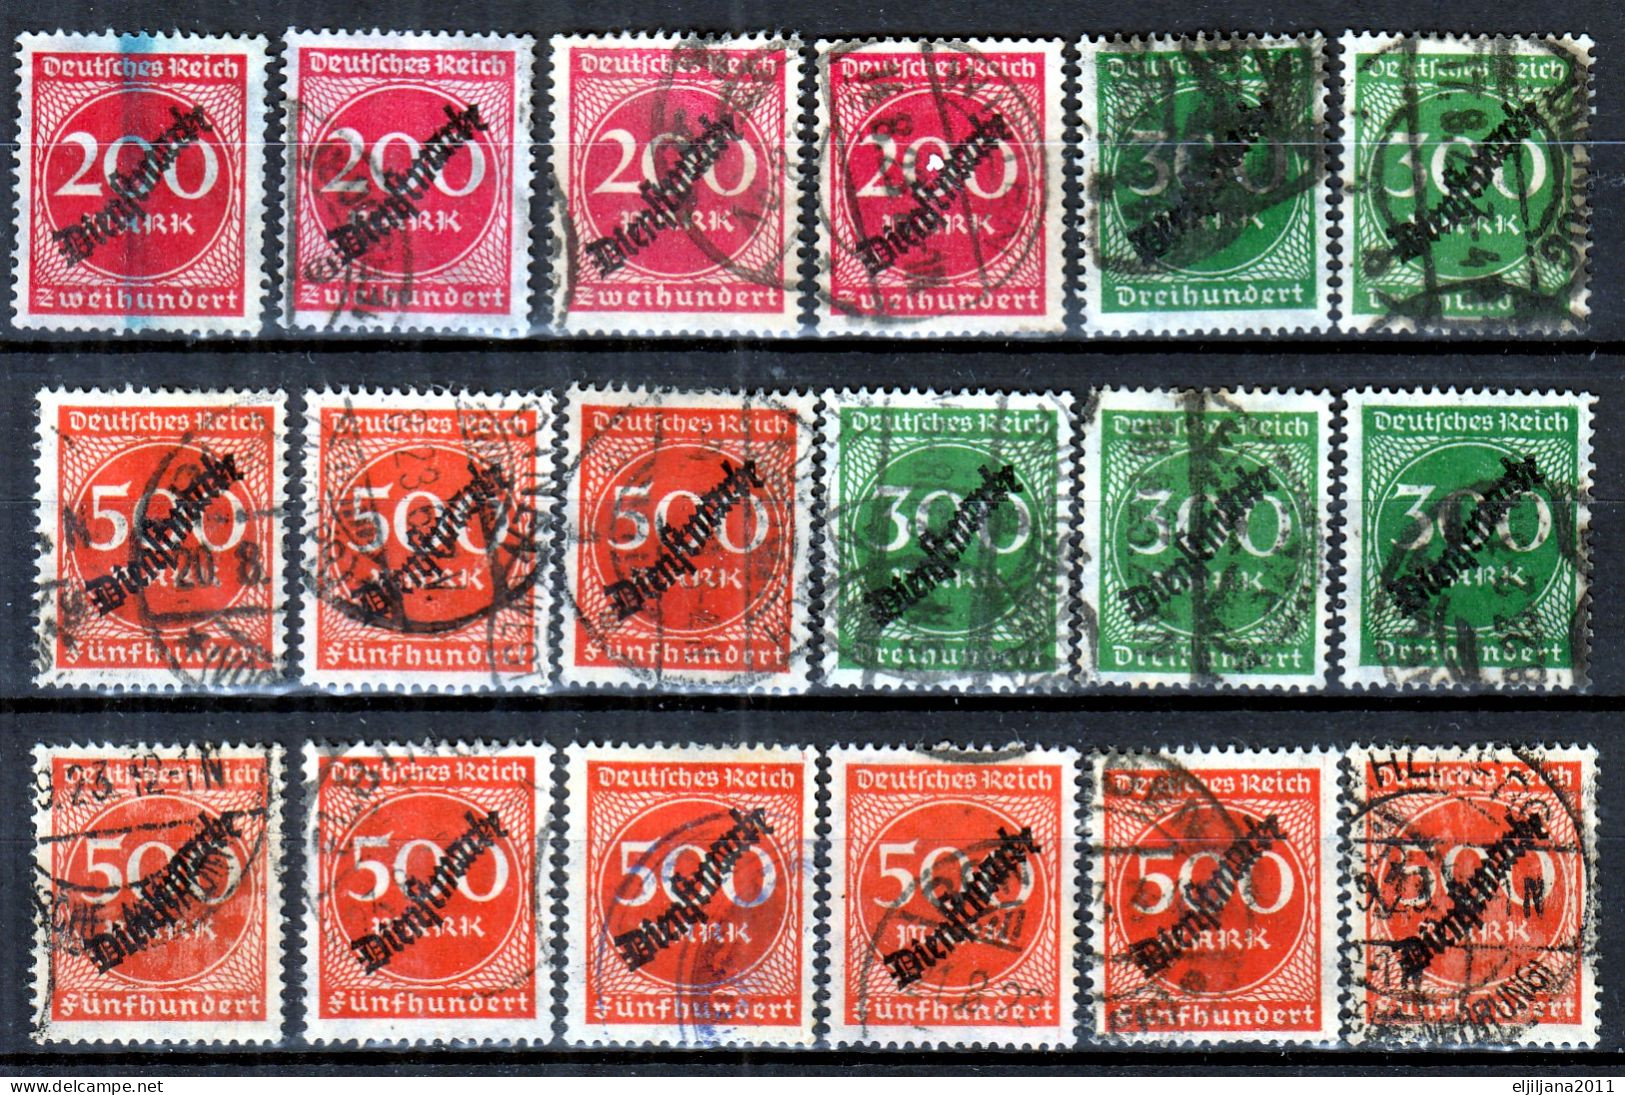 ⁕ Germany, Deutsches Reich 1923 Infla ⁕ Dienstmarke /official Stamps, Overprint ⁕ 54v ( Used & Unused, No Gum) - Officials